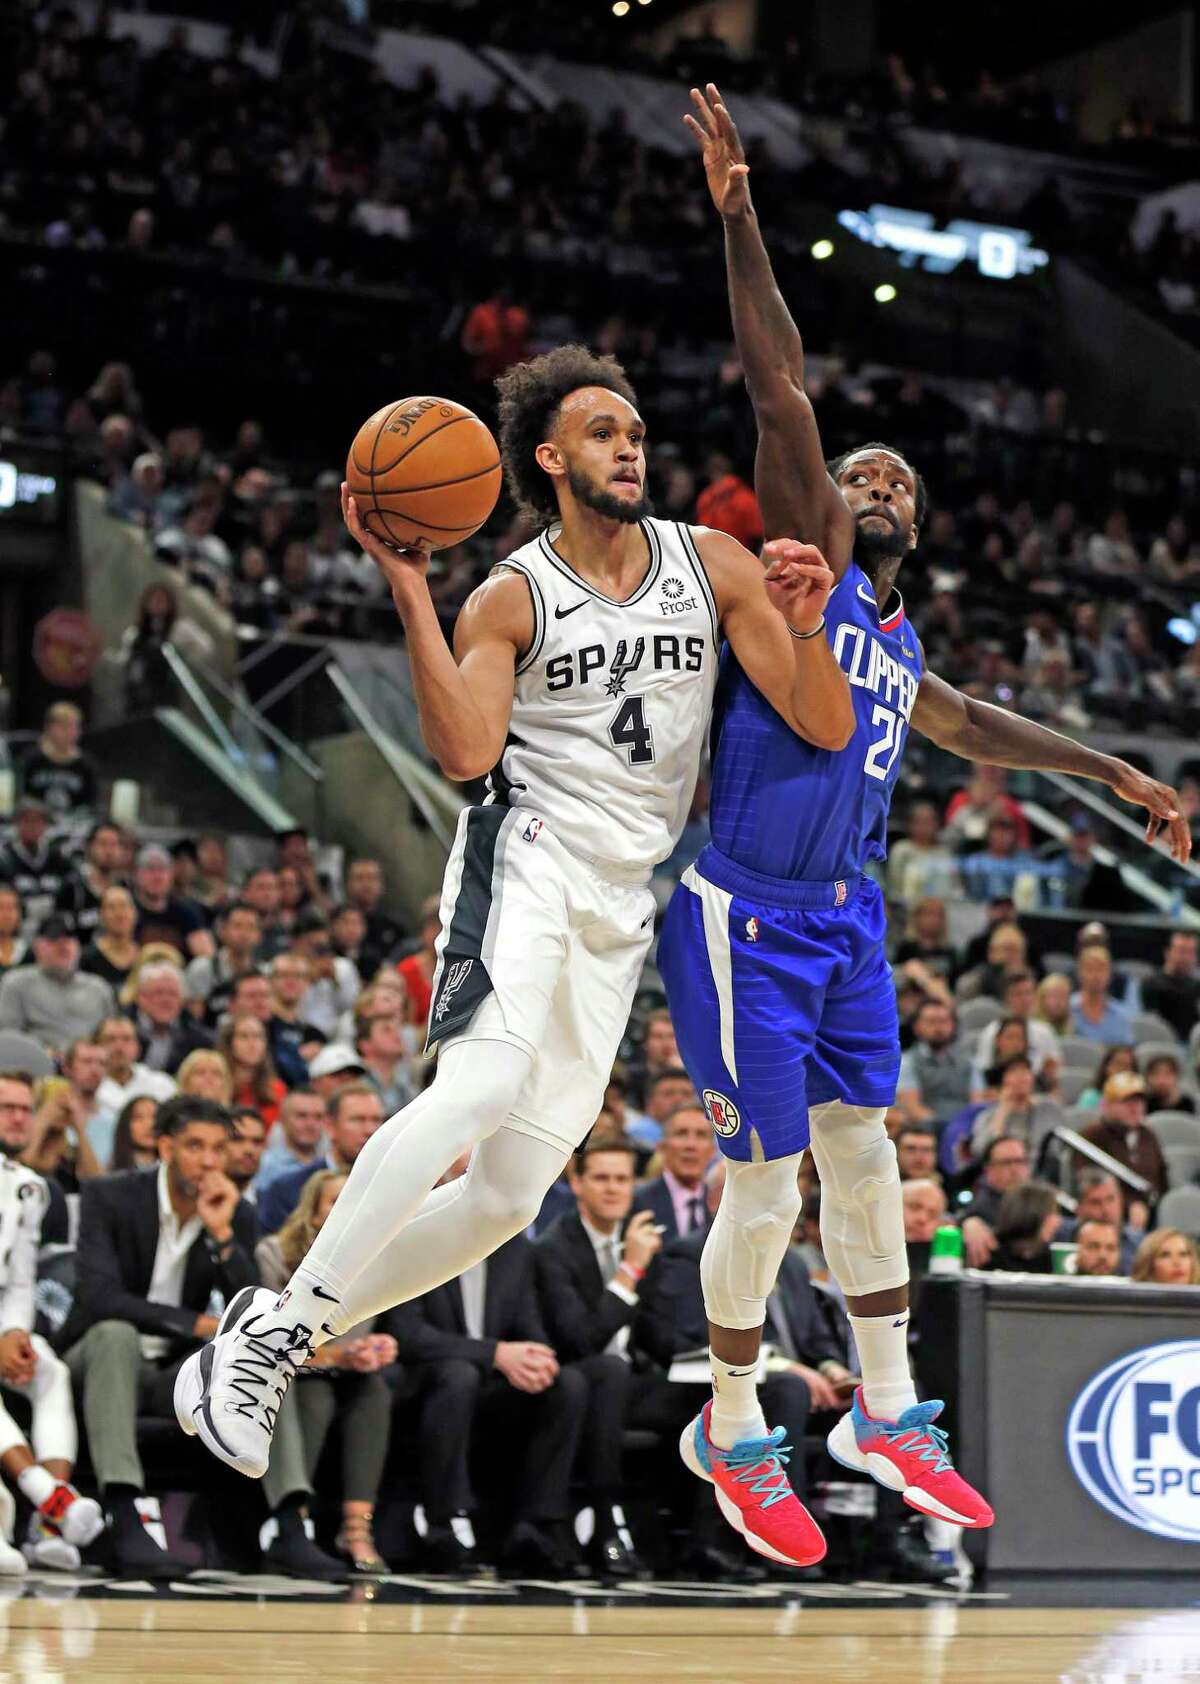 Derrick White #4 of the San Antonio Spurs passes off after being guarded by Kawhi Leonard #2 #2 of the Los Angeles Clippers in the first half of the game between the San Antonio Spurs and the Los Angeles Clippers on Friday, November 29,2019 at AT&T Center